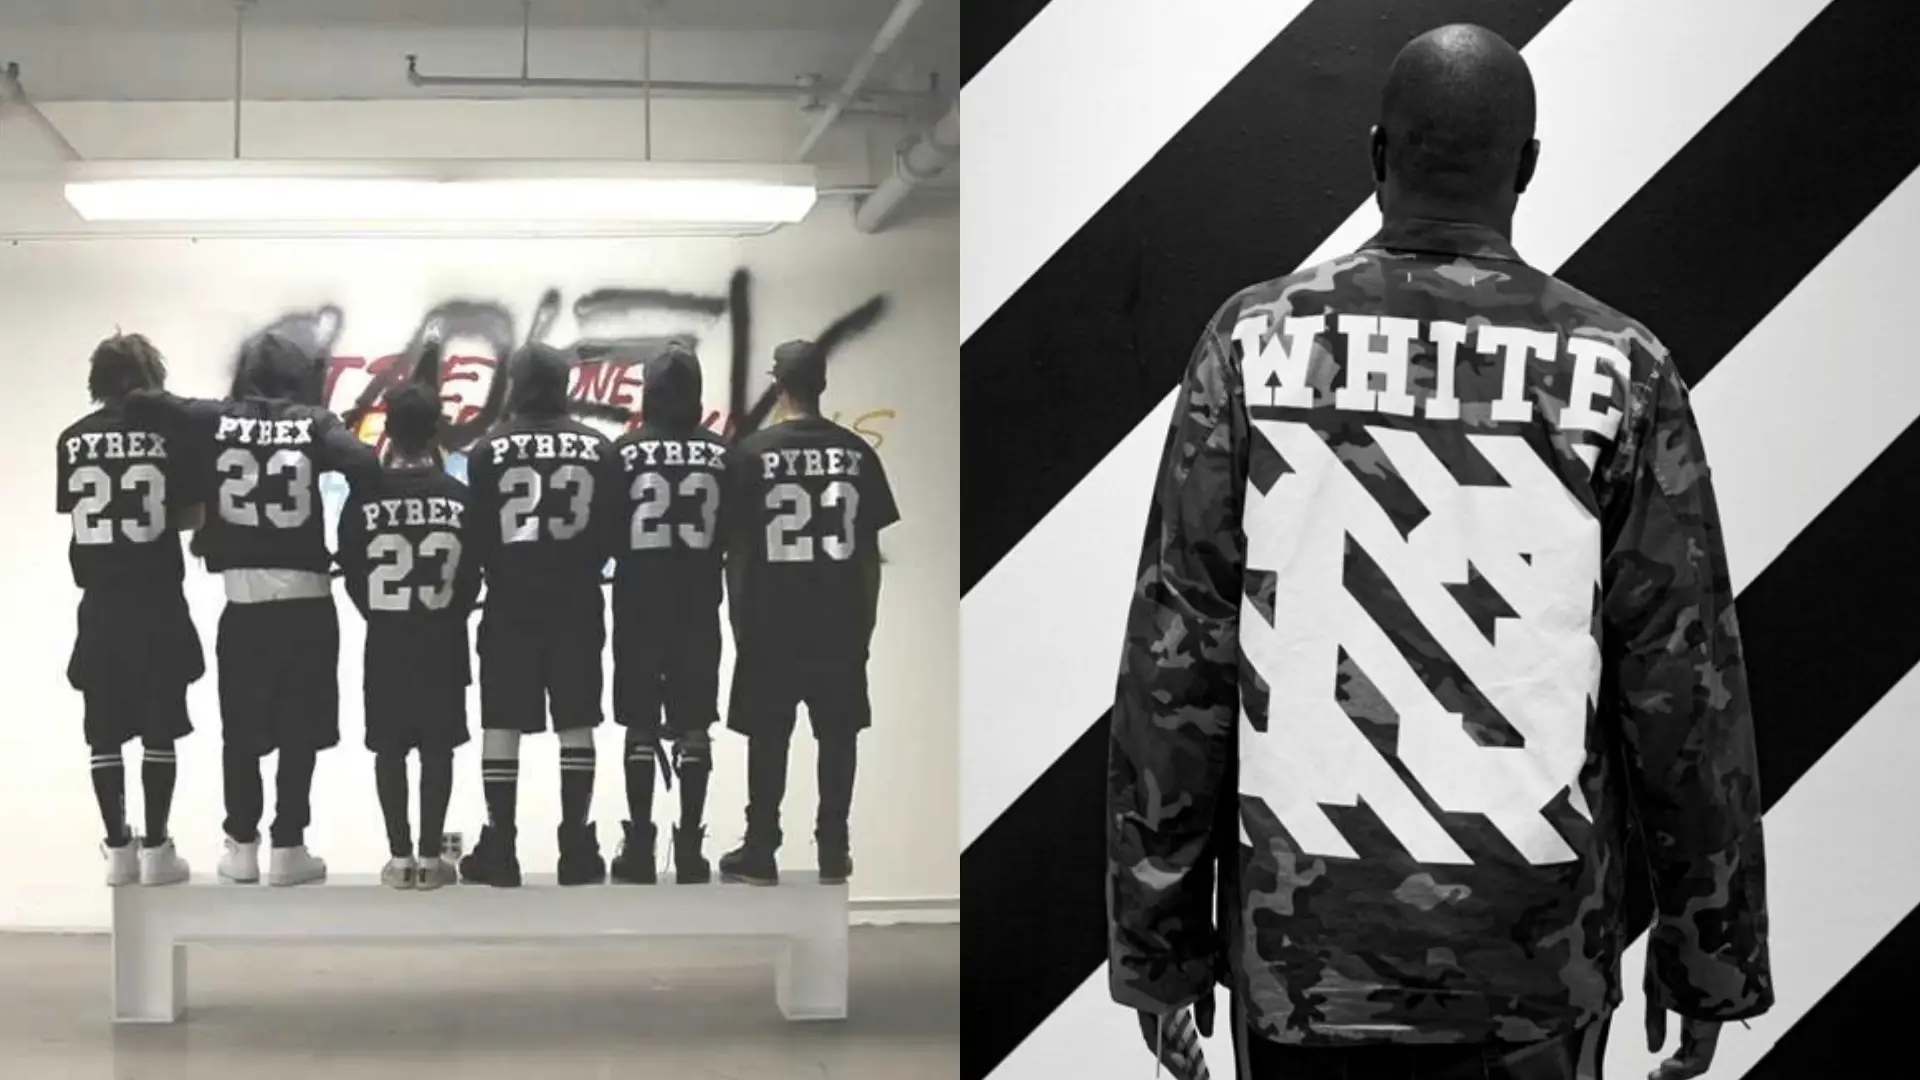 Stepping out of Virgil Abloh's shadow.